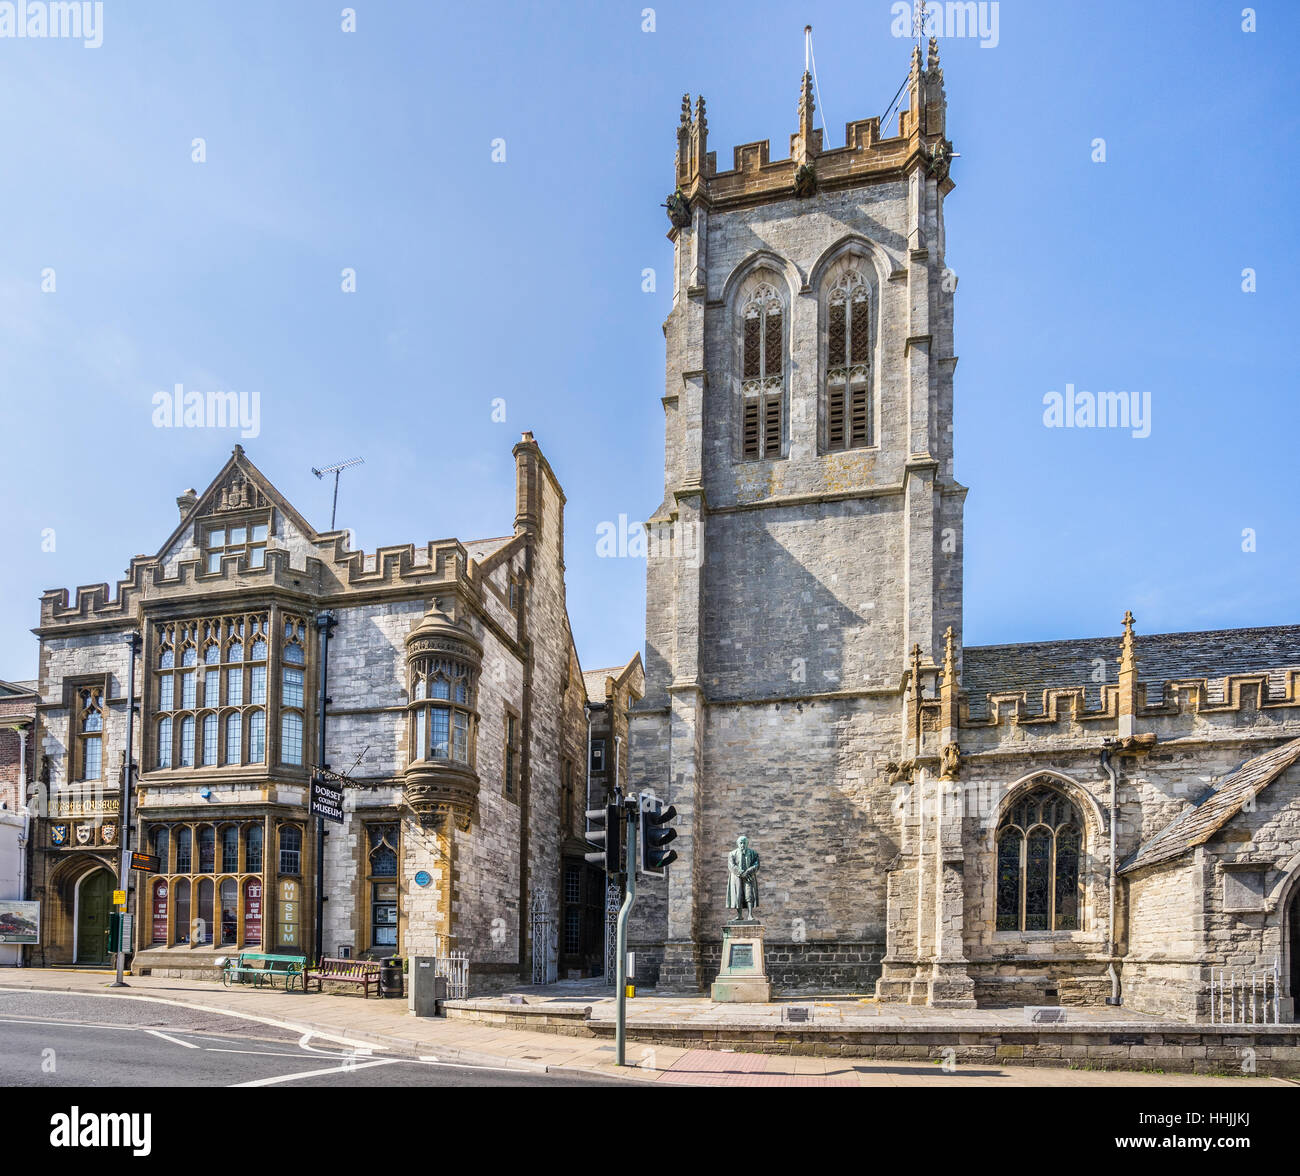 Great Britain, Dorset, Dorchester, view of the Dorset County Museum and St. Peter's Church Stock Photo